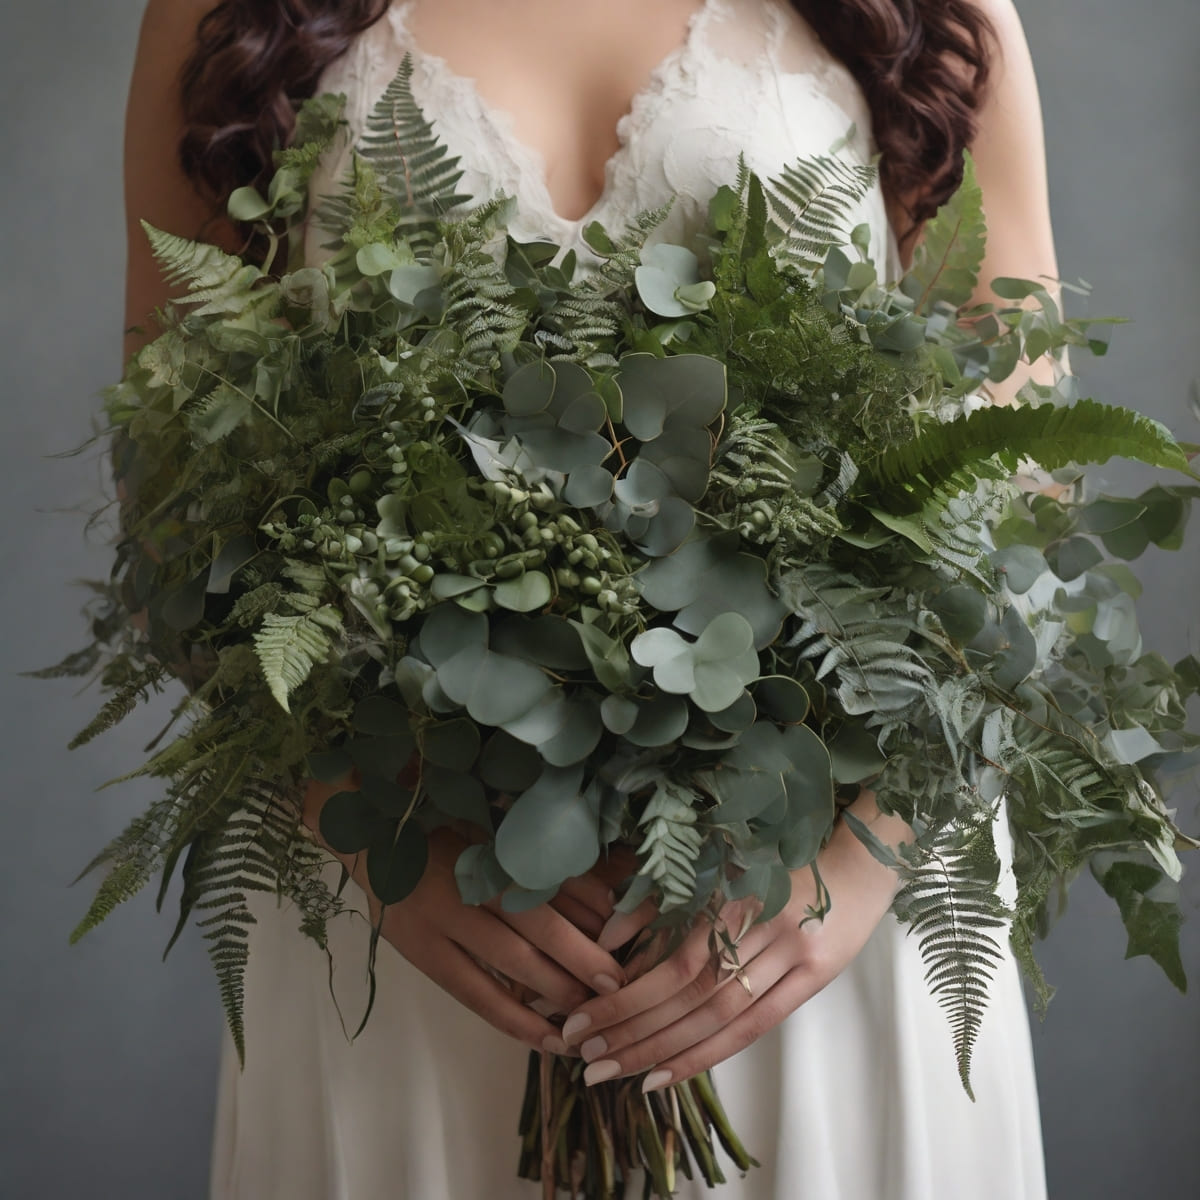 Going Green with Foliage-Focused Bouquets